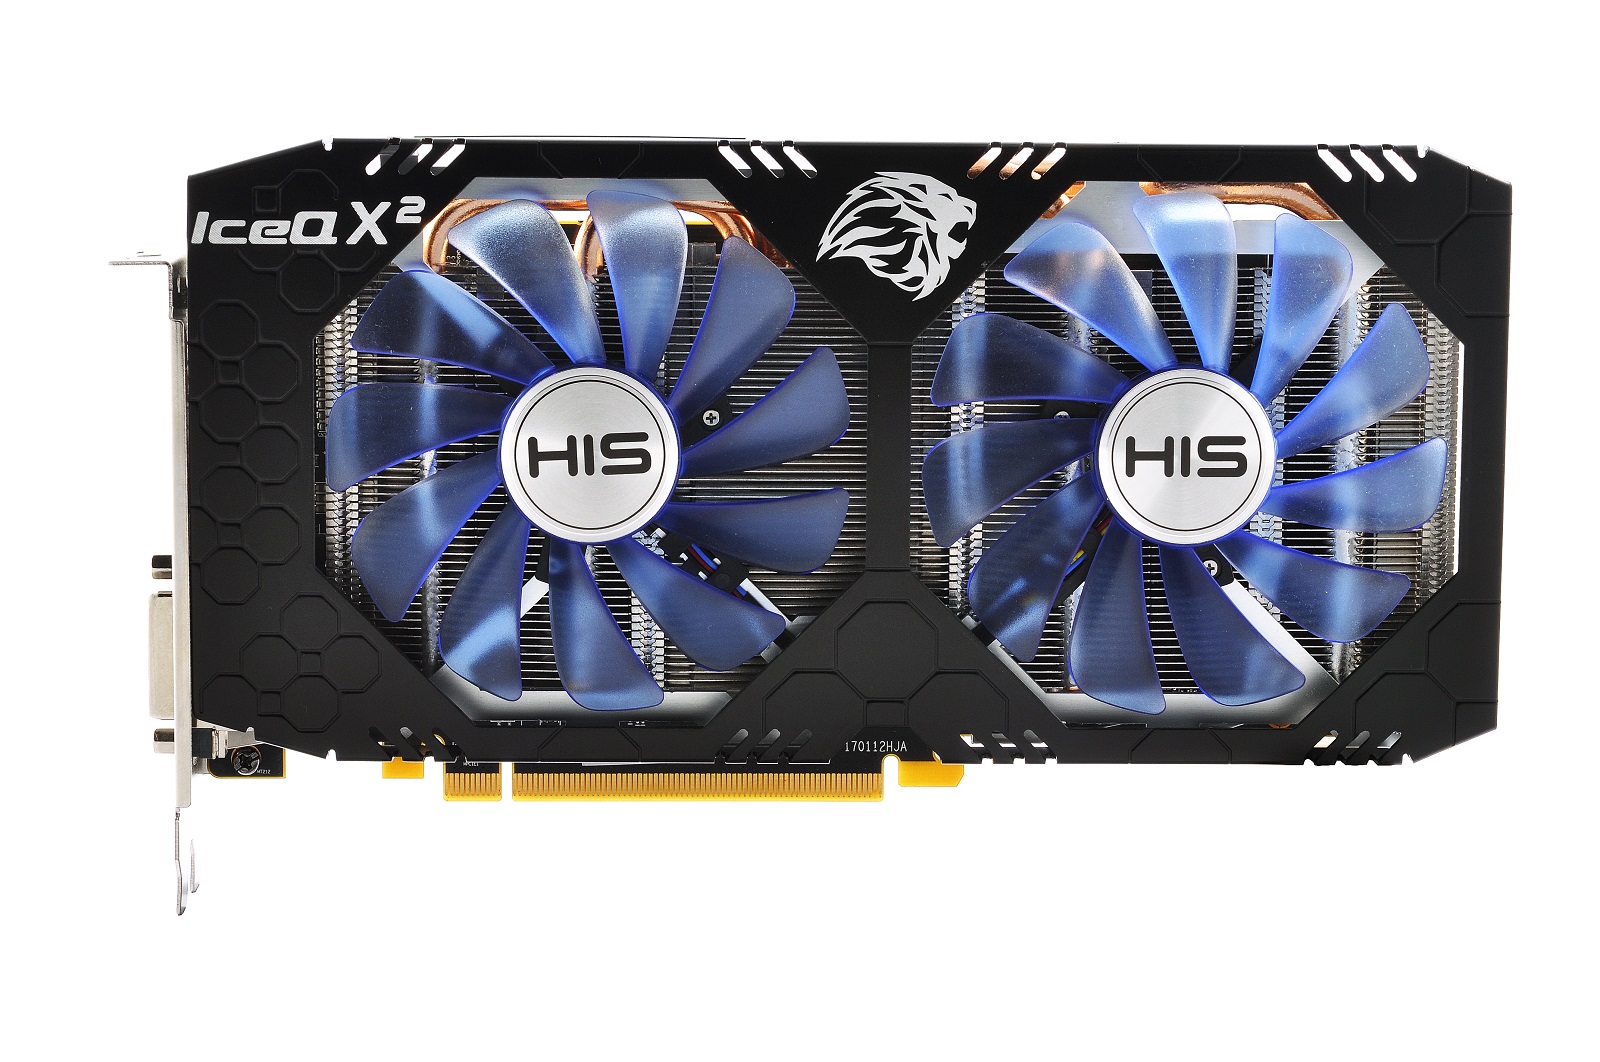 His Rx 580 Iceq X Oc 8gb Rx 580 Series Desktop Graphics Products His Graphic Cards